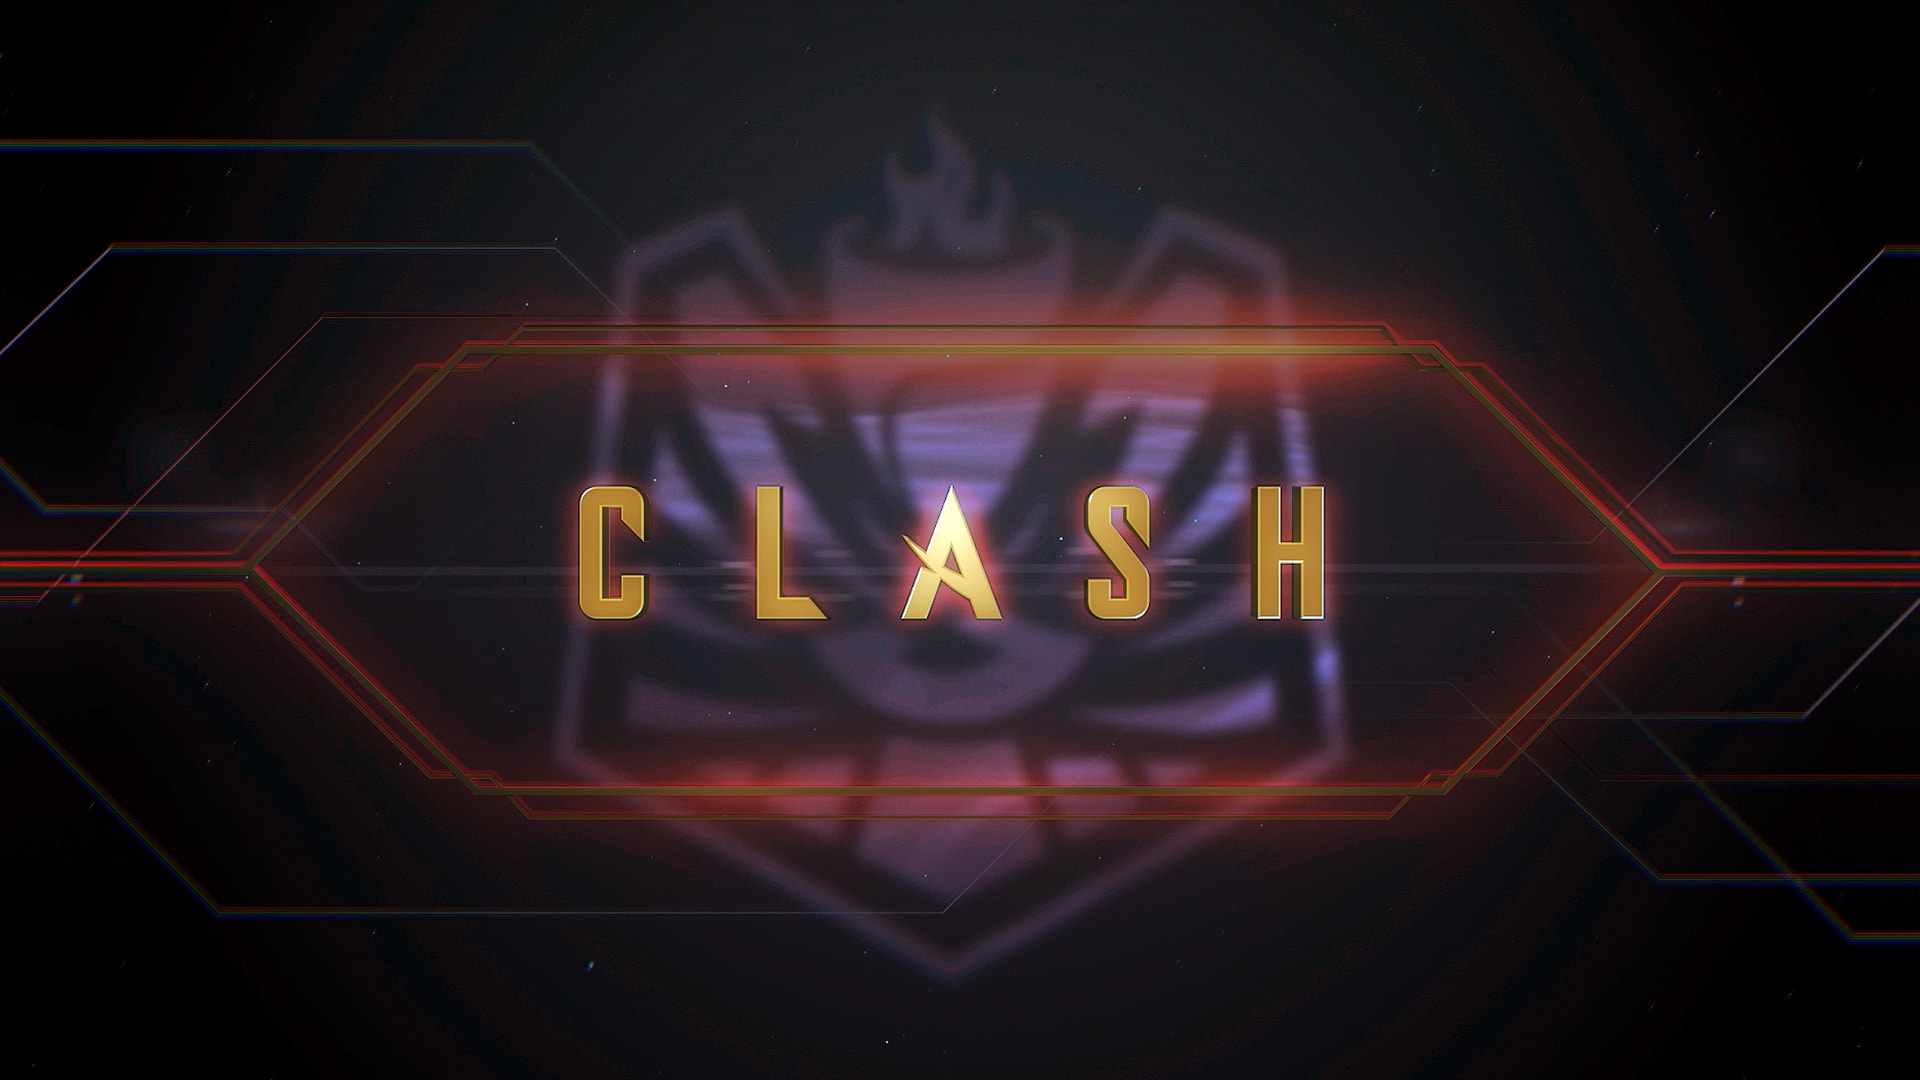 All Dates for League of Legends Clash in 2022 - League of Legends